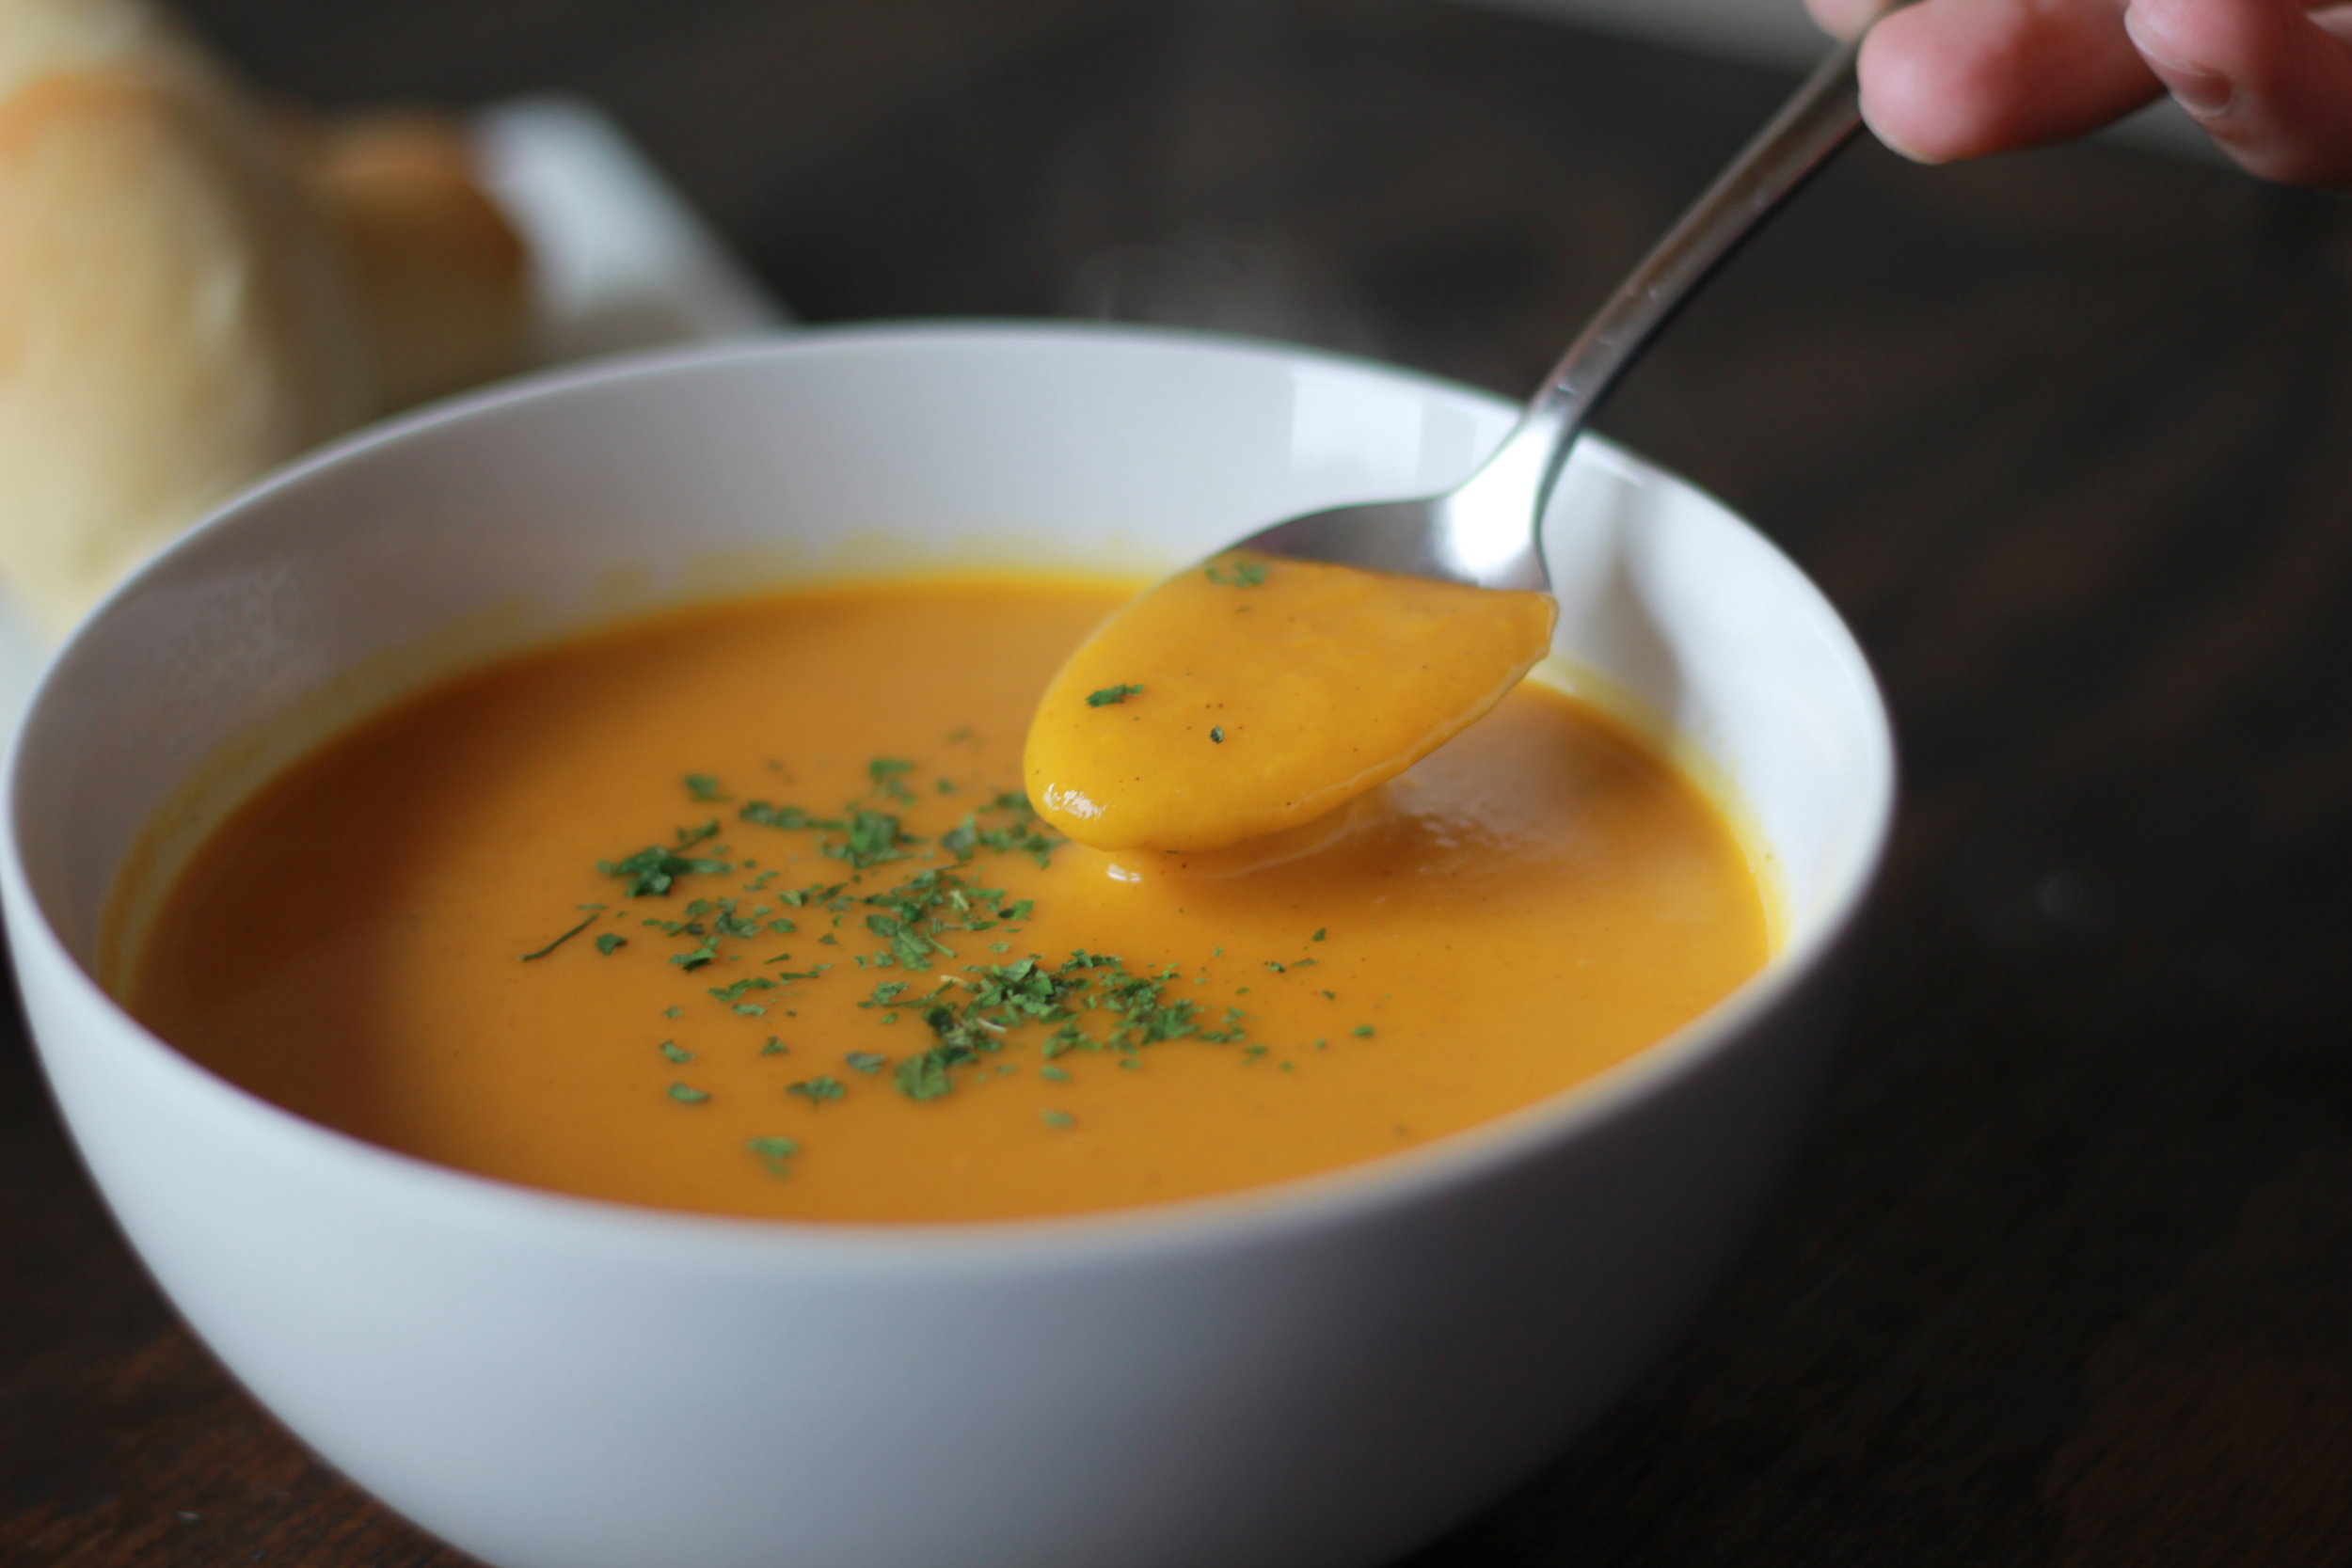 I brought this delicious Gingered Butternut Squash Soup to Thanksgiving.